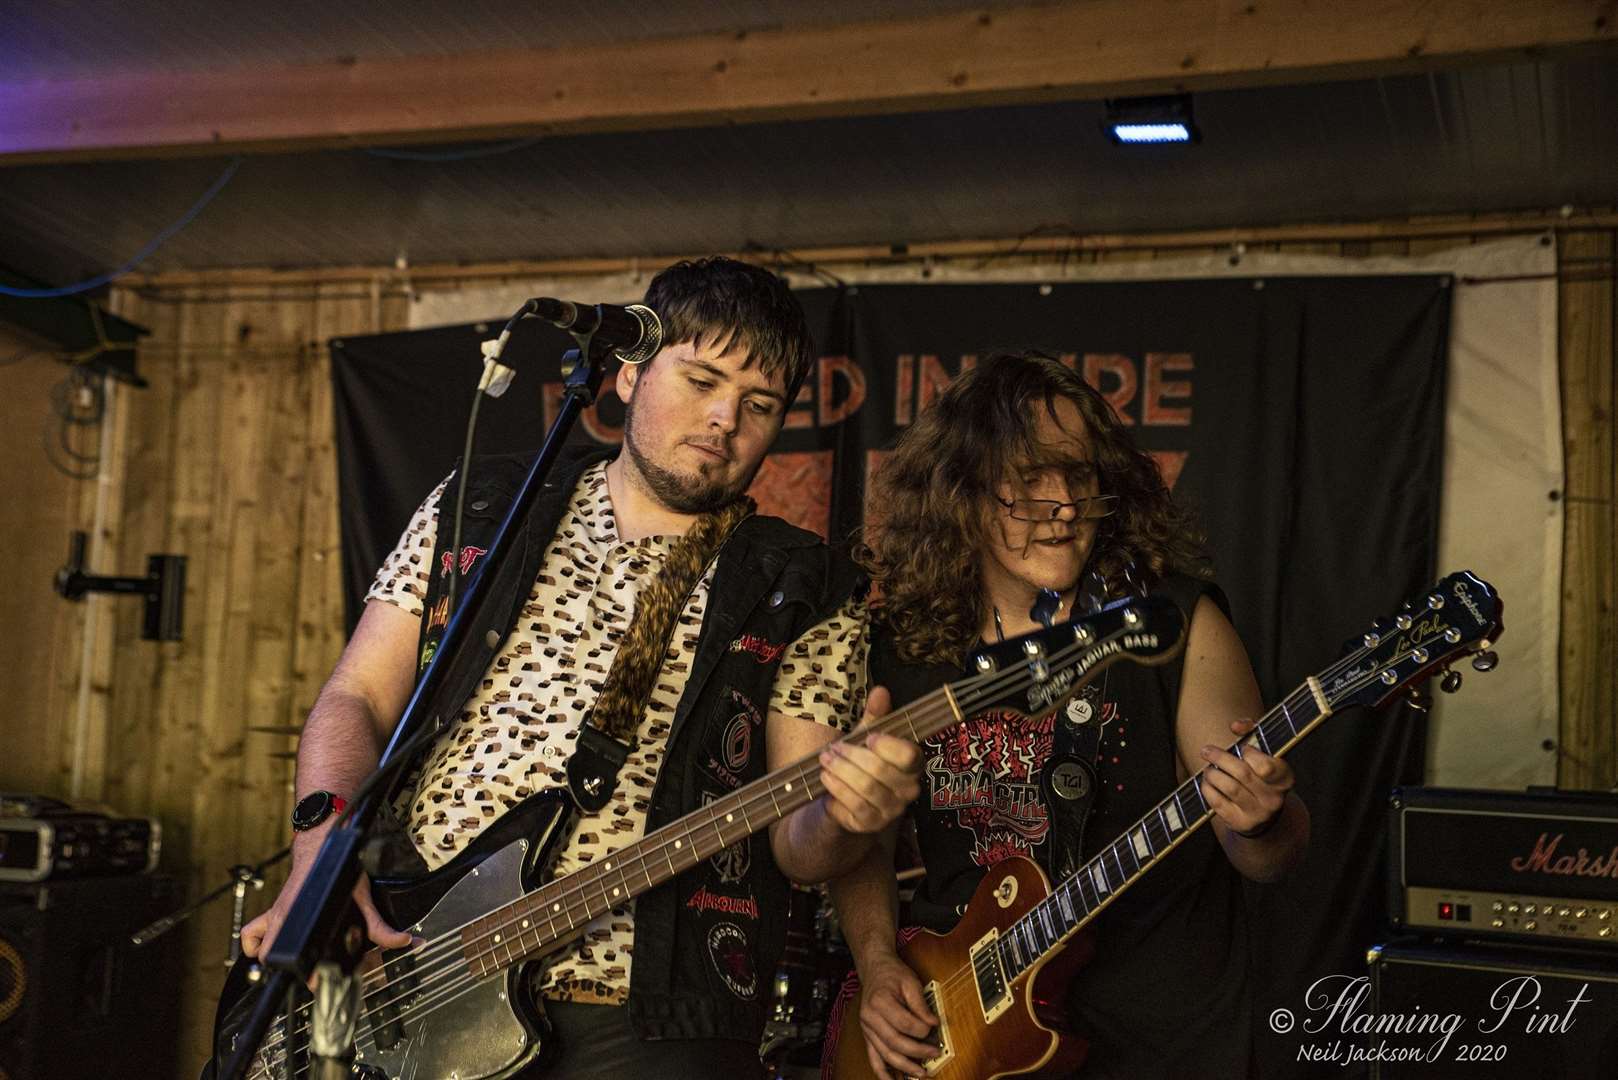 Alexi and Tommy B of Bad Actress on stage at the Smoke on the Water festival in June. Picture by Neil Jackson.